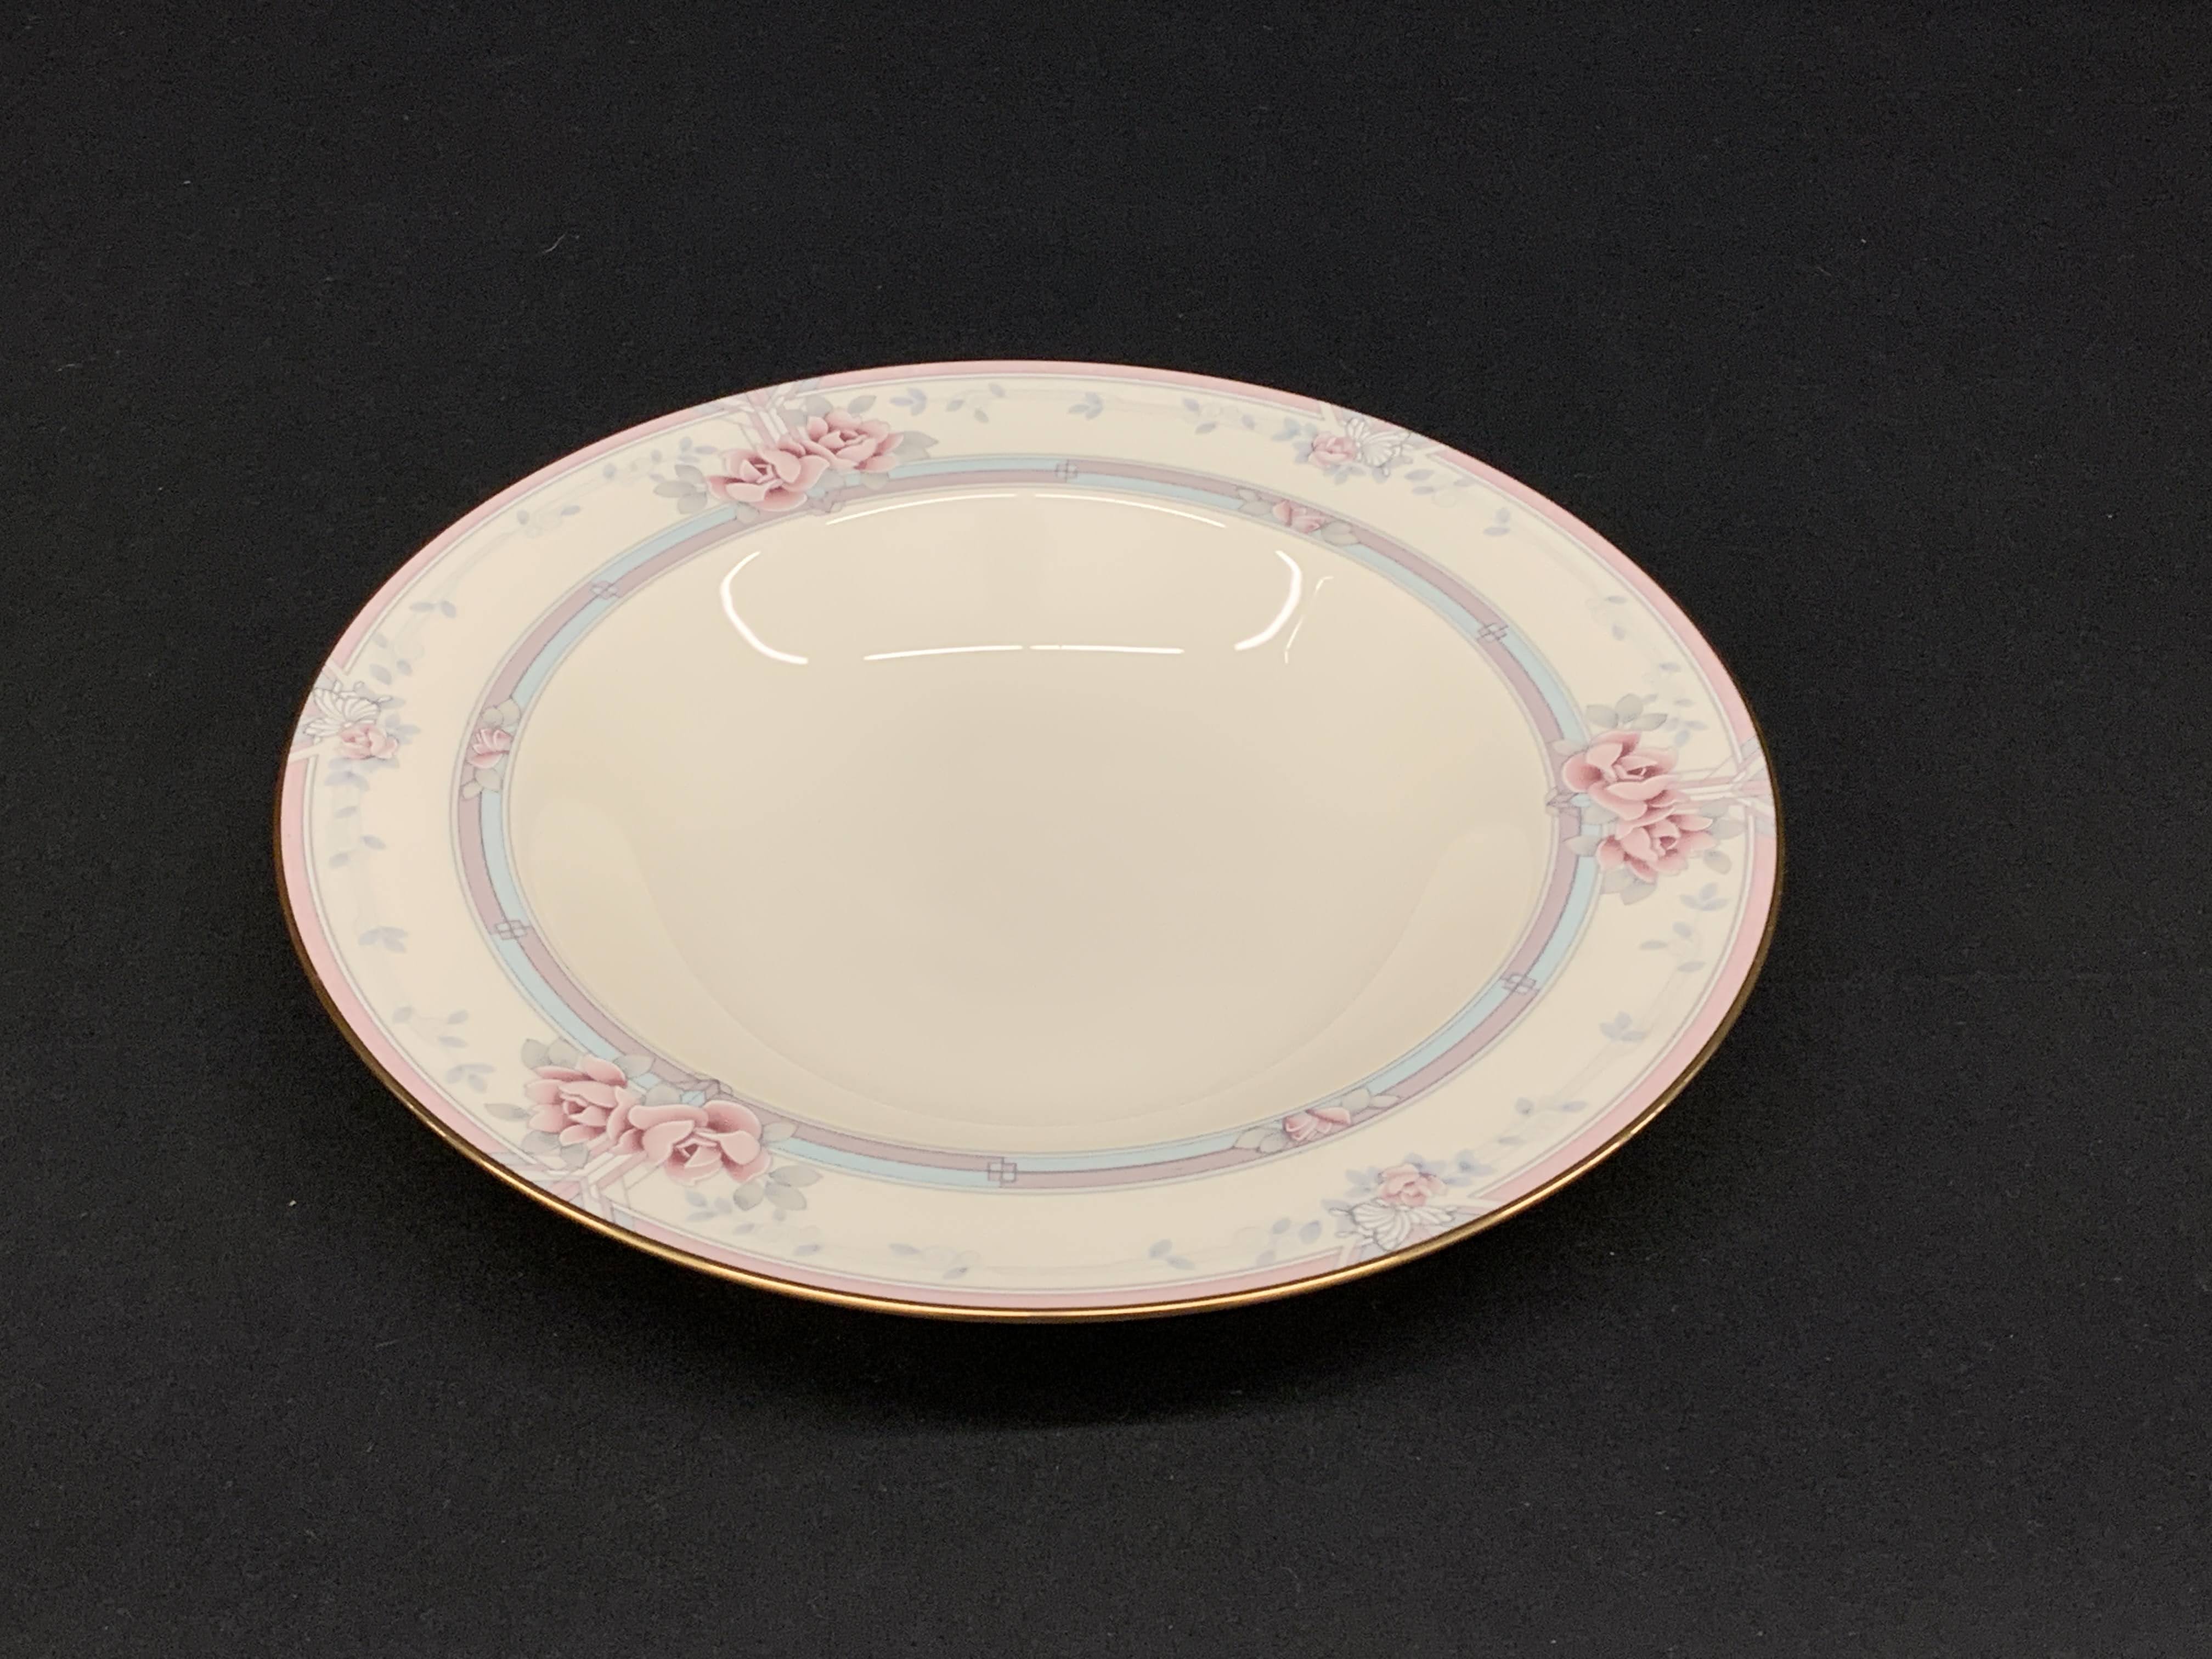 Noritake Magnificence Pattern - Porcelain Fine China - Ivory Pink Color Gold Band - Round Vegetable Bowl